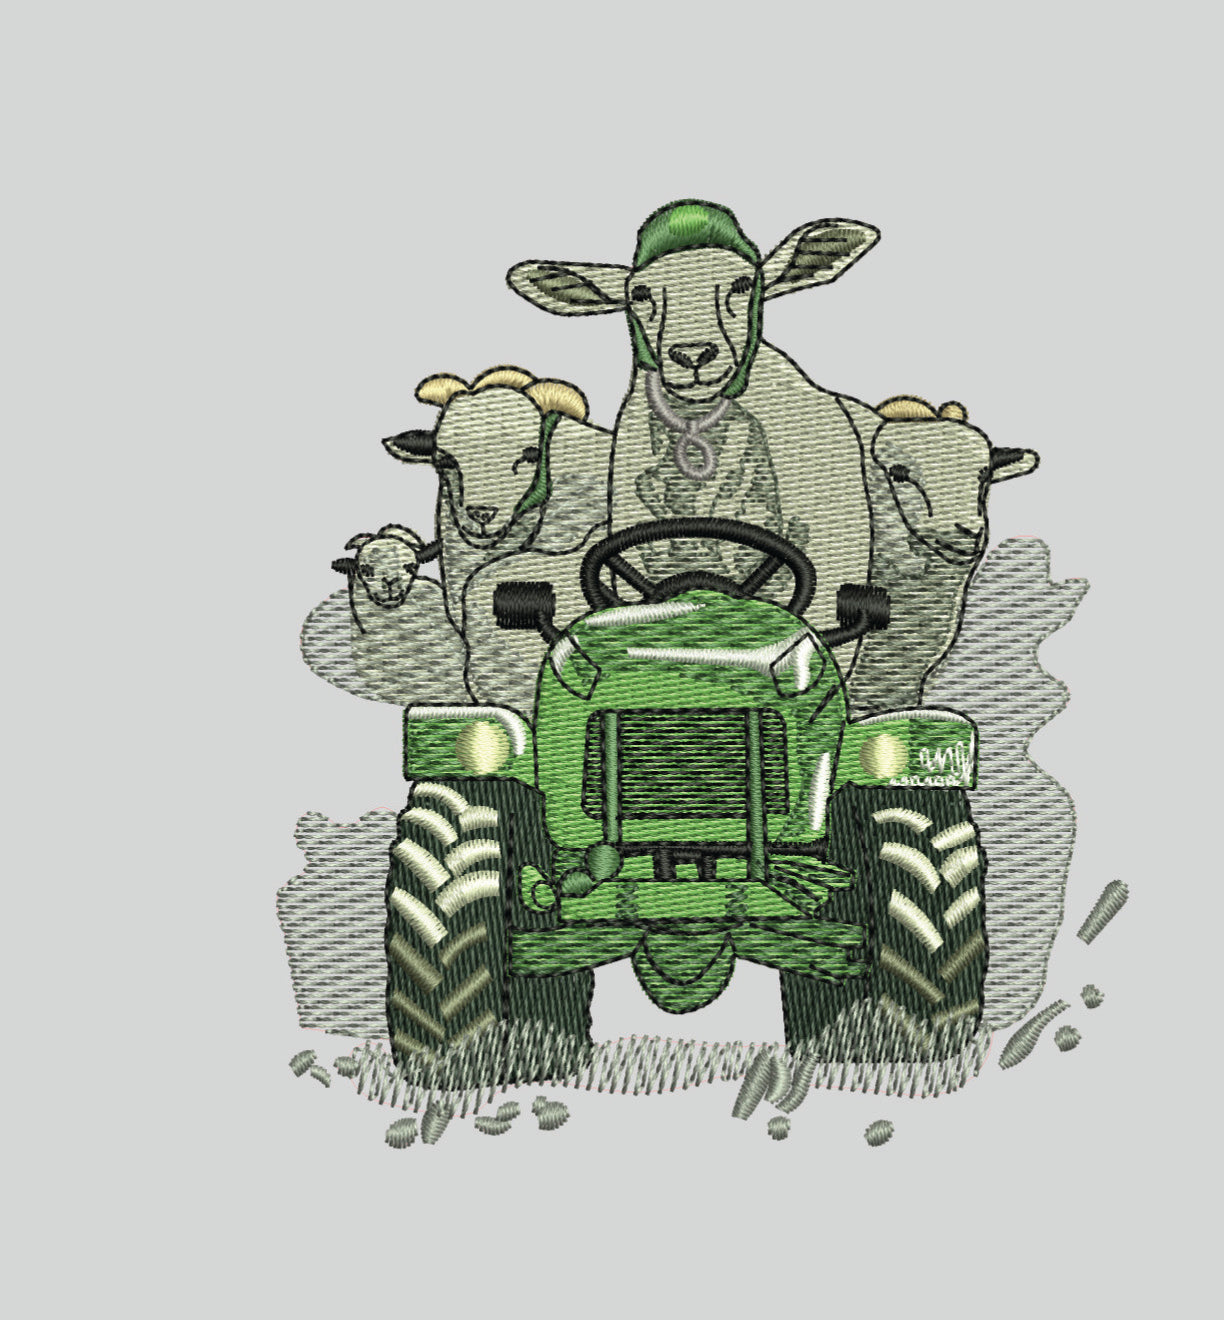 Embroidery file of Tractor and sheep 